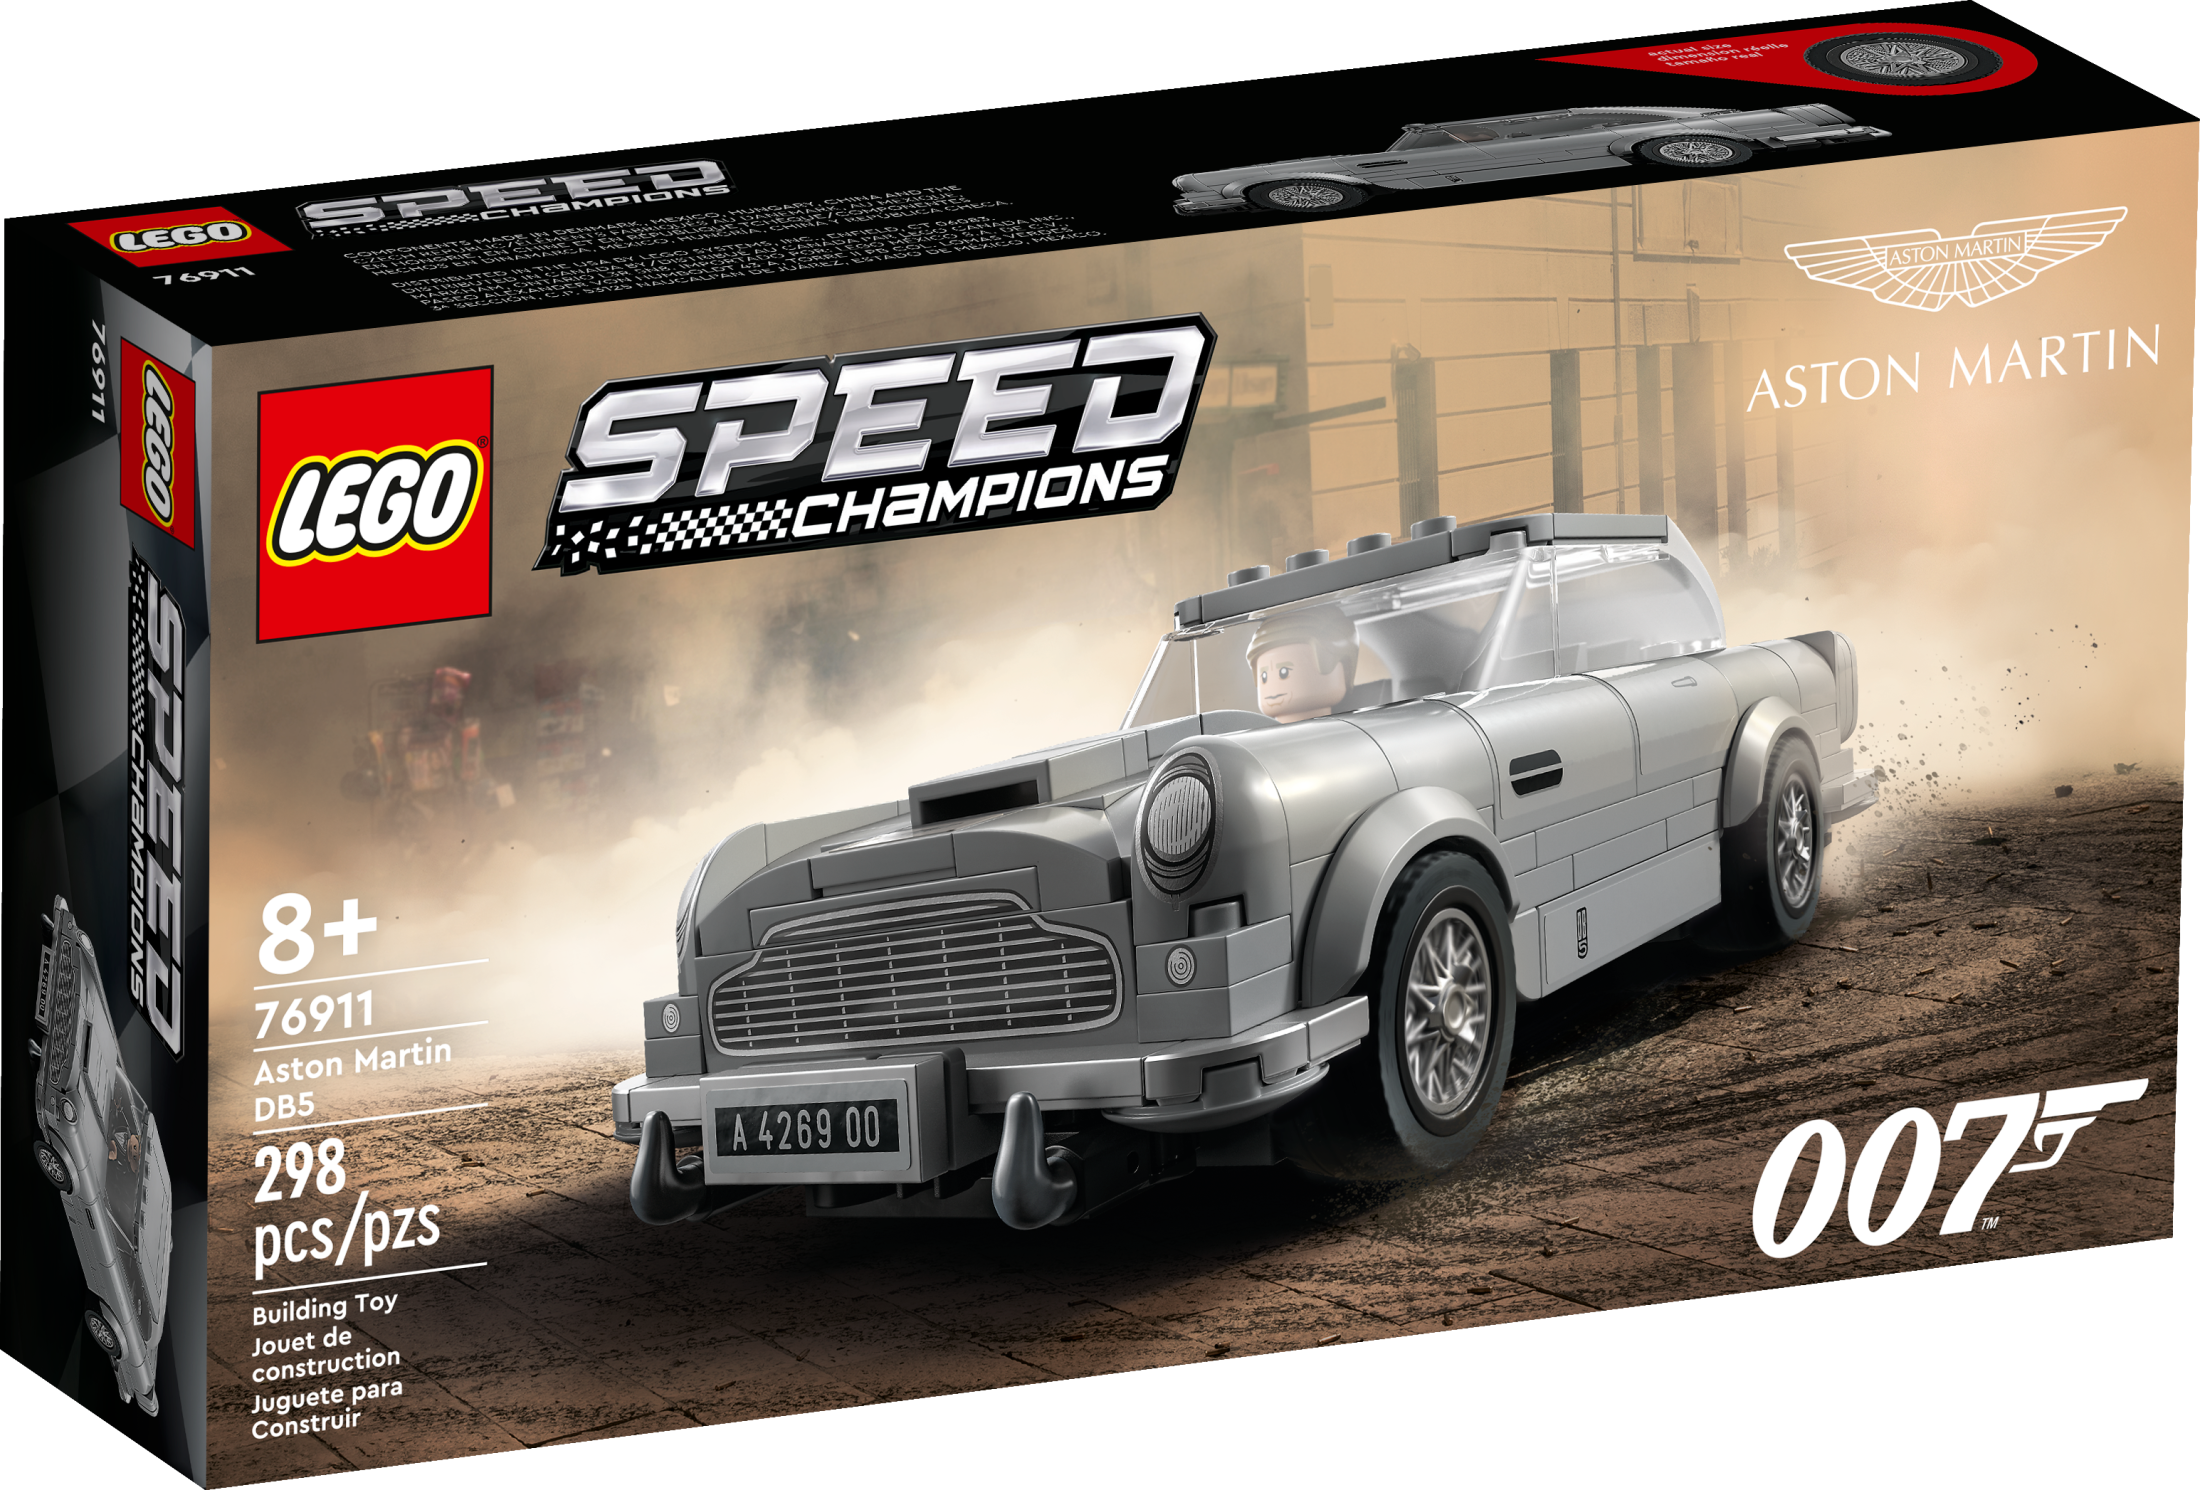 LEGO Speed Champions 007 Aston Martin DB5 76911 Building Toy Set Featuring James Bond Minifigure, Car Model Kit for Kids and Teens, Great Gift for Boys and Girls Ages 8 and Up - image 3 of 8